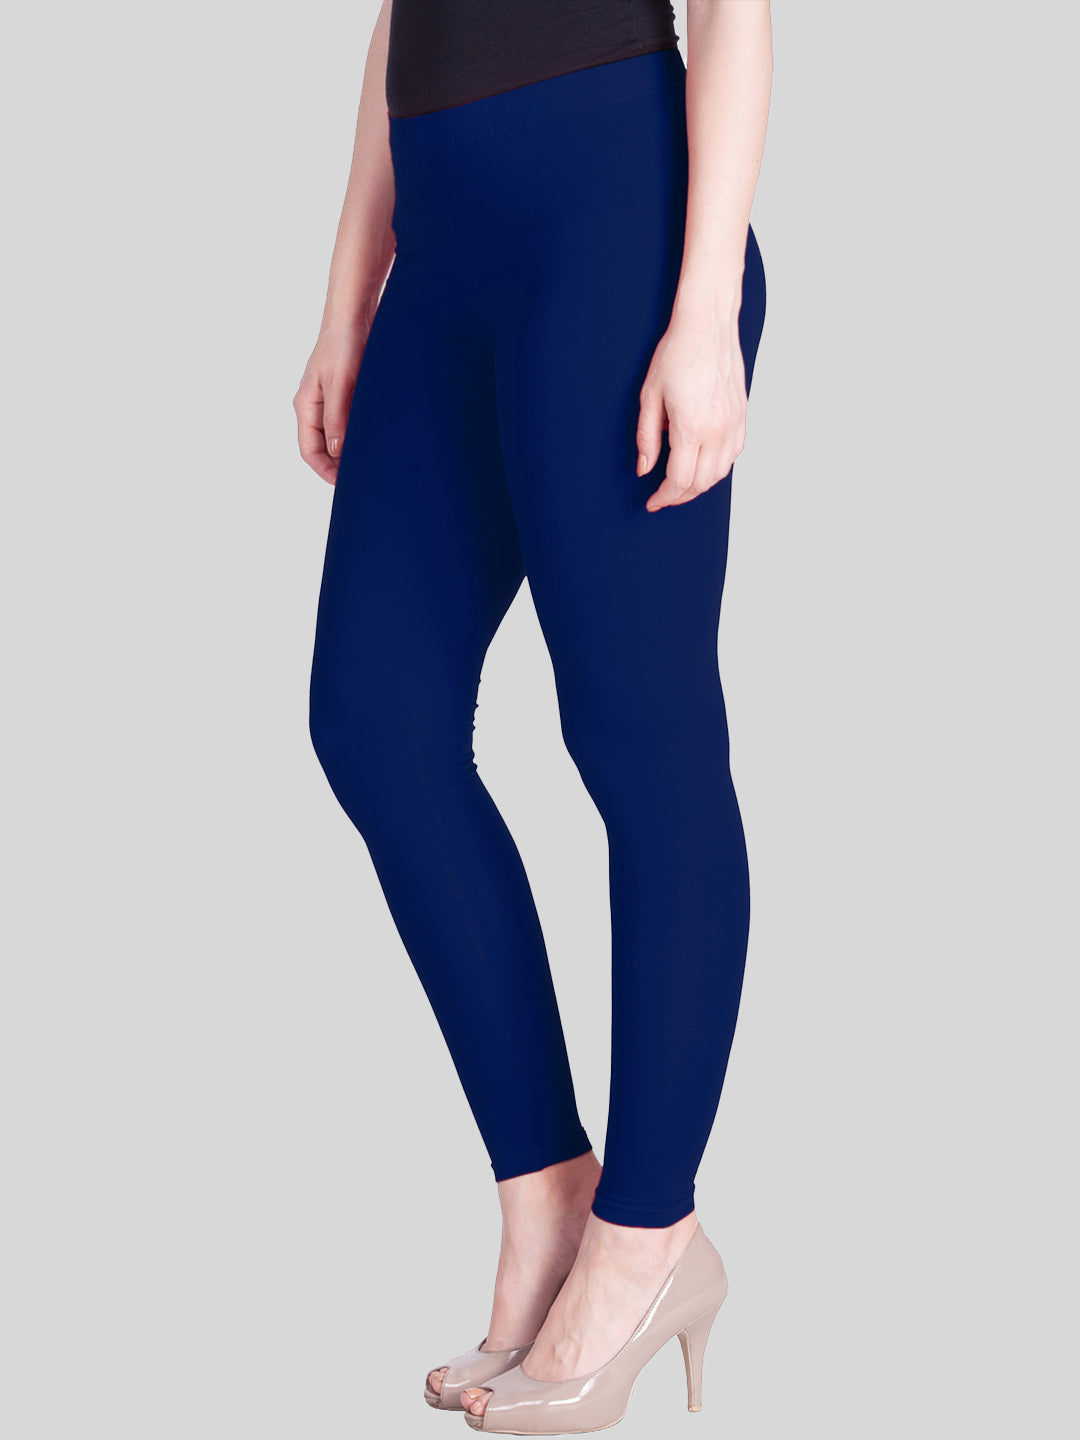 Buy Ankle Length Lyra Leggings online from Posh Urban An Exclusive